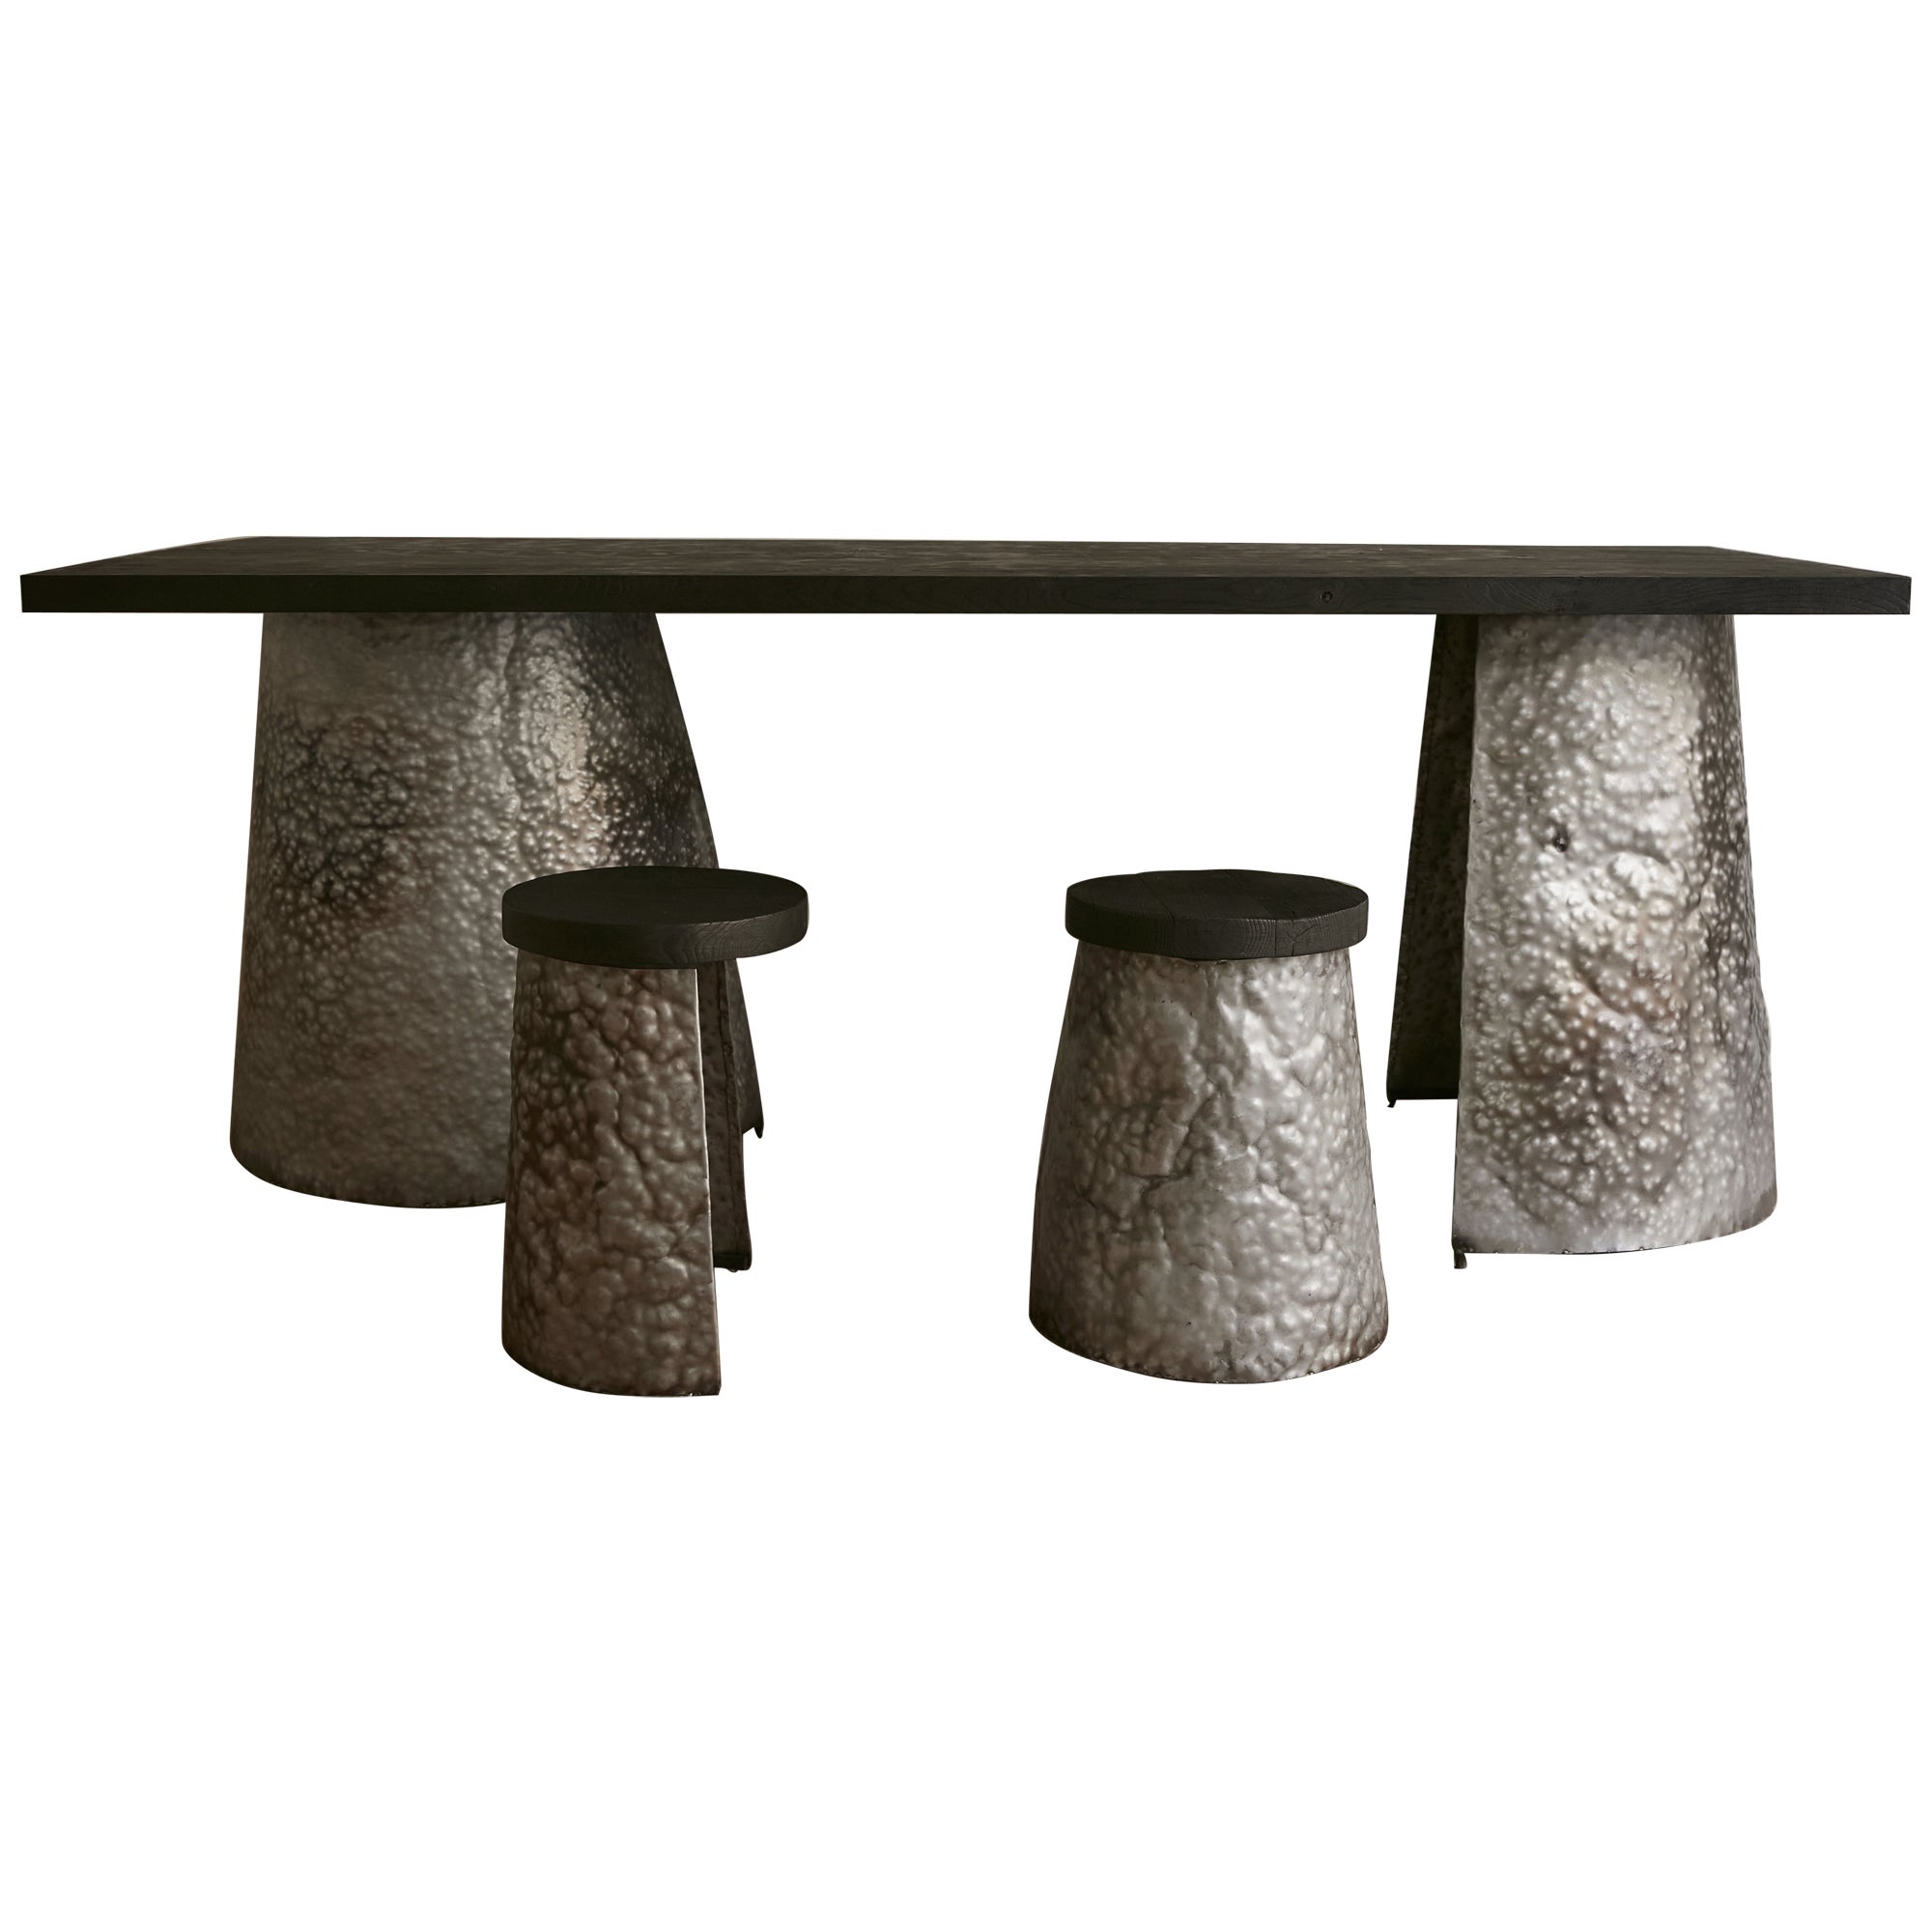 Bruo hammered steel & burned wood dining table and stools, contemporary handmade For Sale